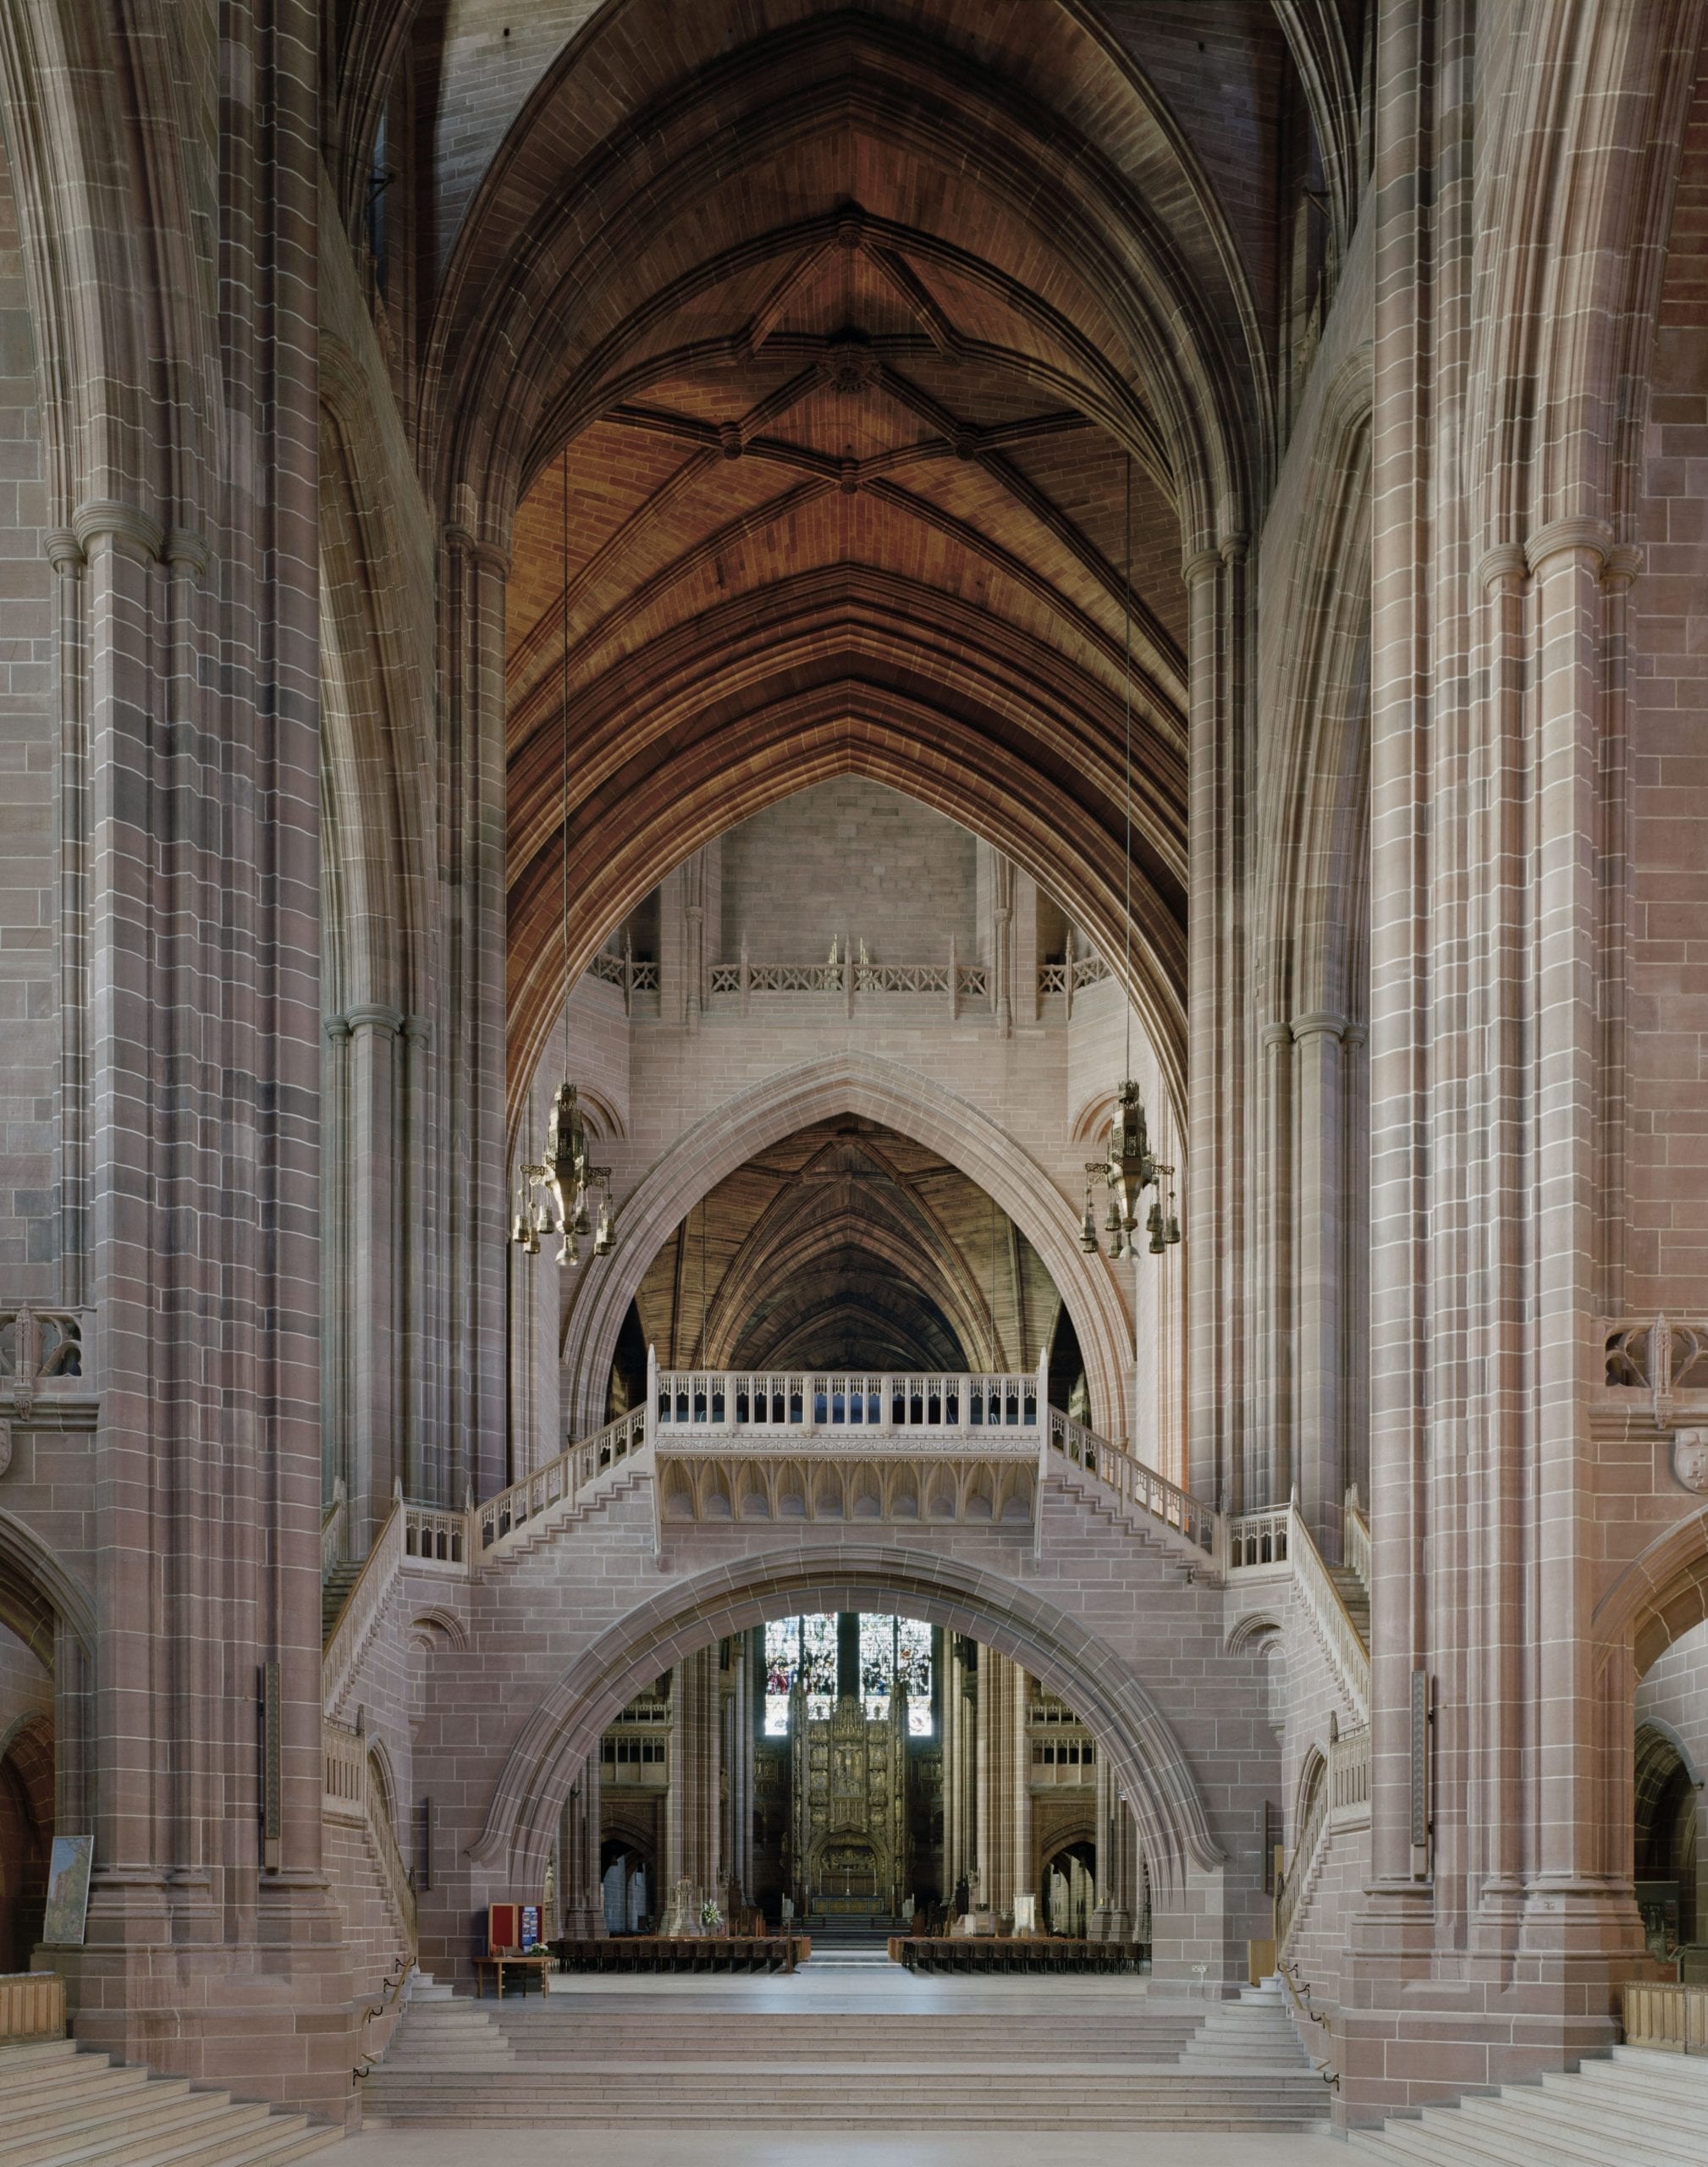 GB. England. Liverpool Cathedral.(Christ’s) From 'The English Cathedral', a Book published by Merrell in October 2012. Between 2010 and 2012 Peter Marlow photographed the Nave's of all forty two of England's Anglican cathedrals using only natural light at dawn. Marlow’s photographs are accompanied by his commentary on the project, including sketches and preparatory shots; an introduction by V&A senior photography curator Martin Barnes on the tradition of church photography in England, and a concise summary of each cathedral interior by architectural historian John Goodall. 2012